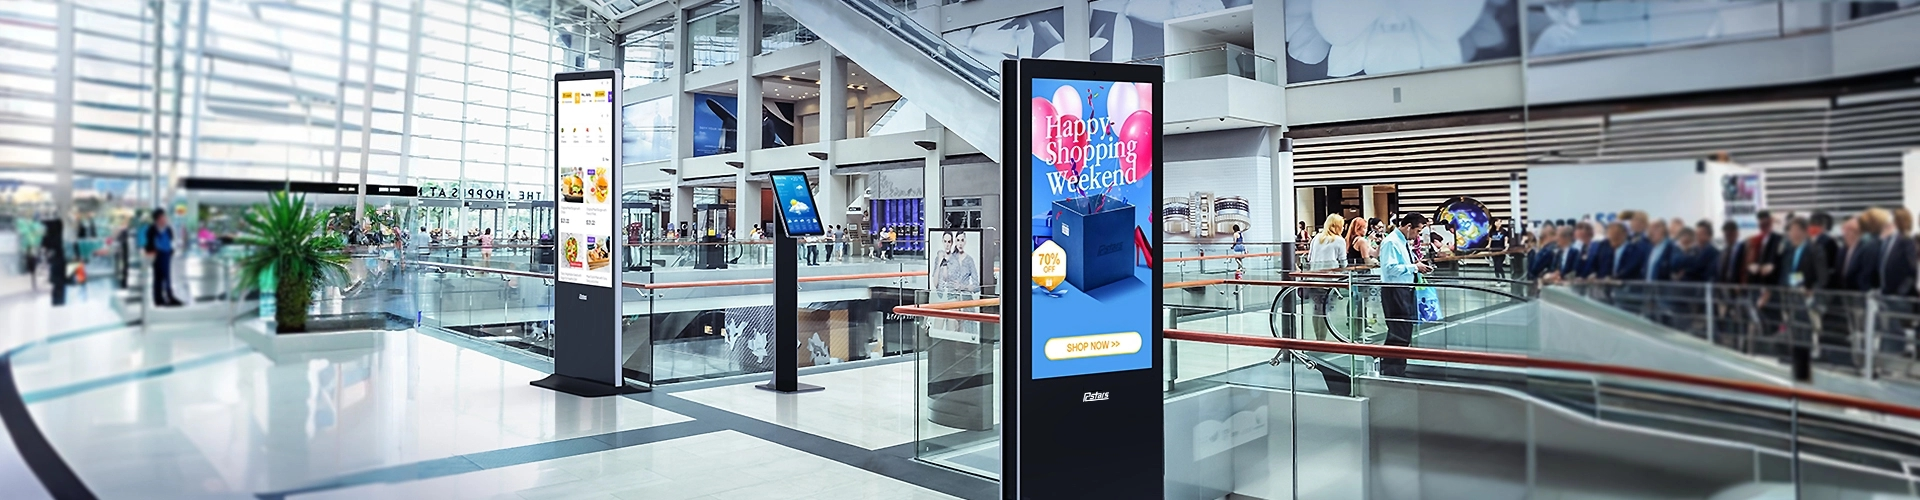 21.5 inch Interactive Advertising Kiosk with Automatic Hand Washing